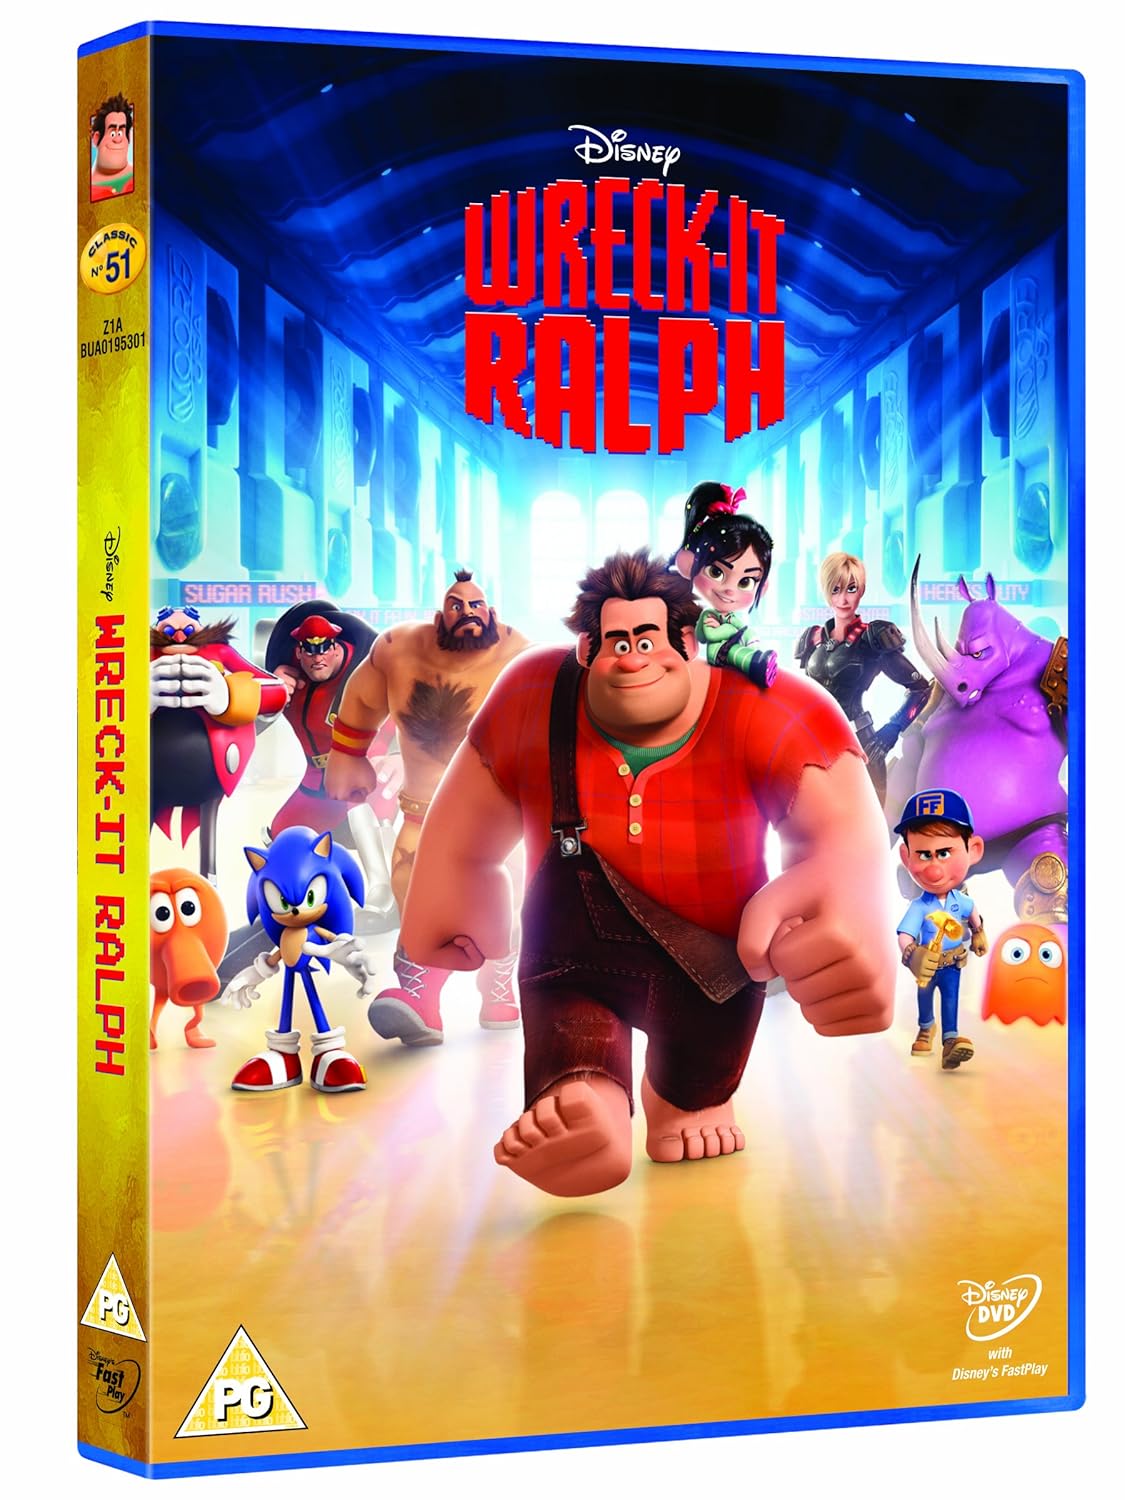 New Movies For Kids 2013 On Dvd